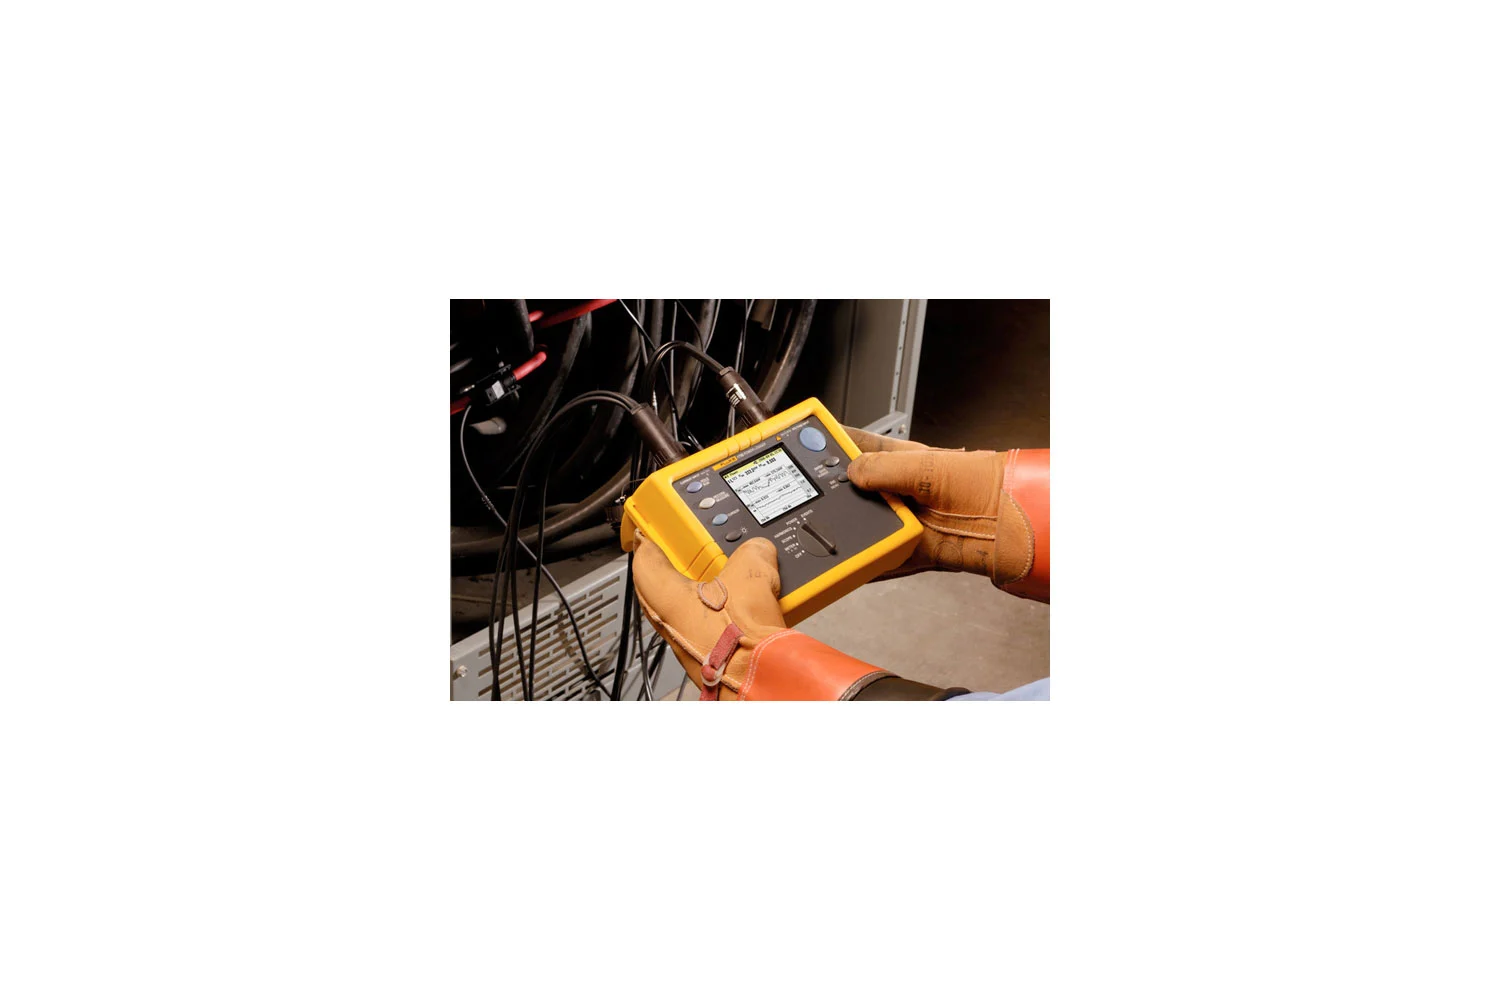 VR1710 Single Phase Power Quality Recorder & Voltage Recorder